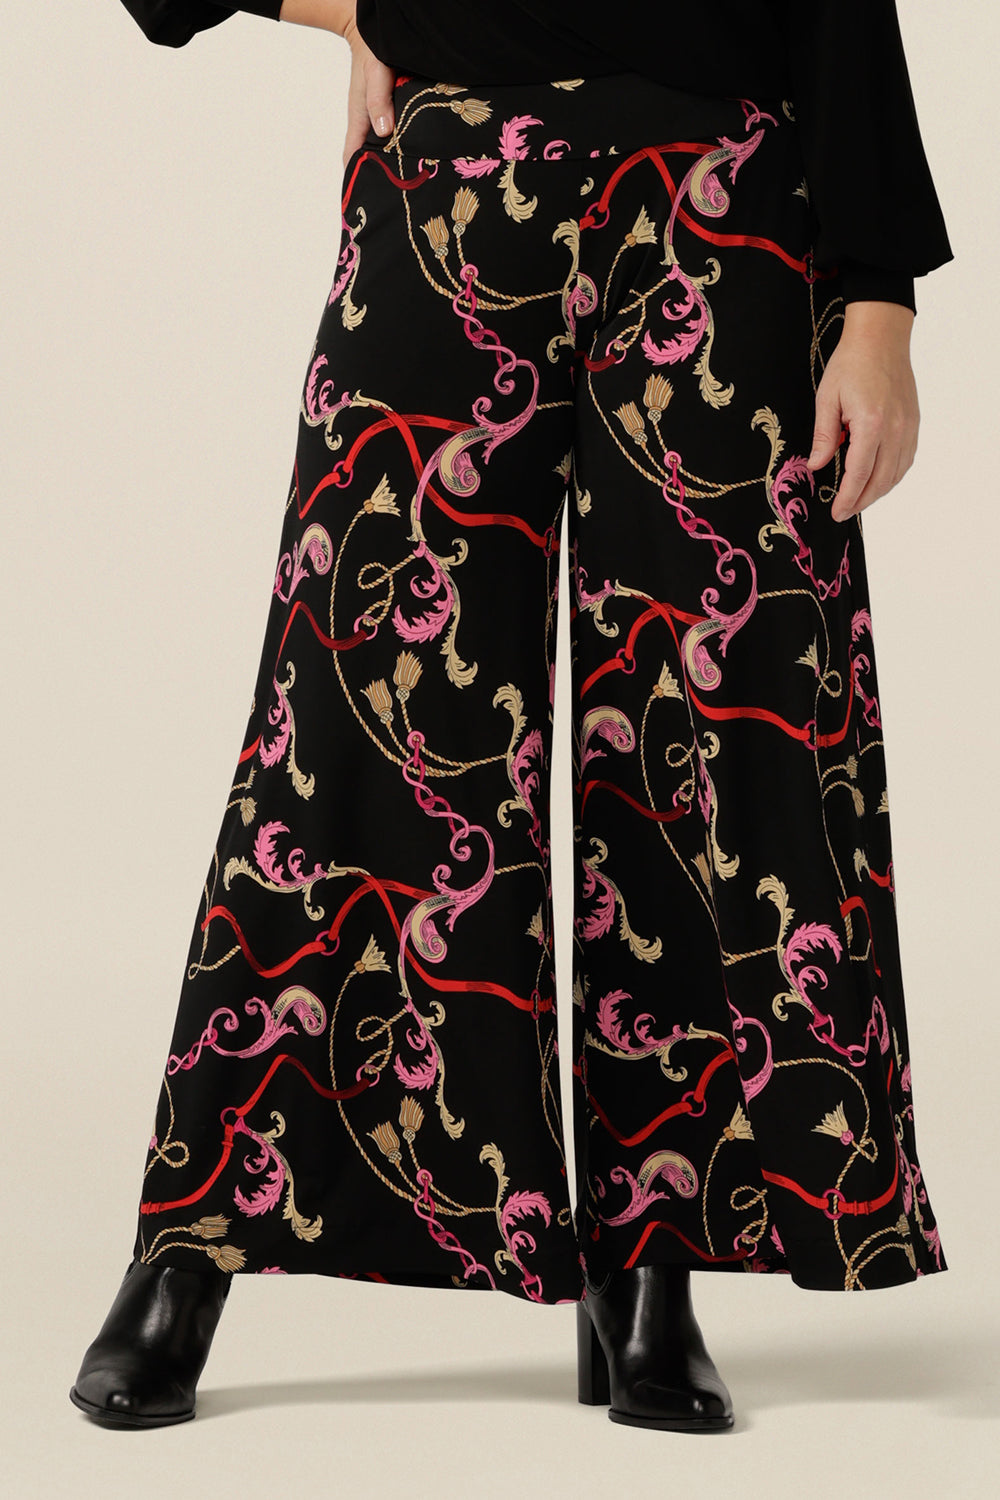 Wide leg pull-on pants in printed stretch jersey. Comfortable pants for work and casual wear, these trousers are made in Australia by women's clothing brand, Leina & Fleur. in sizes 8 to 24.